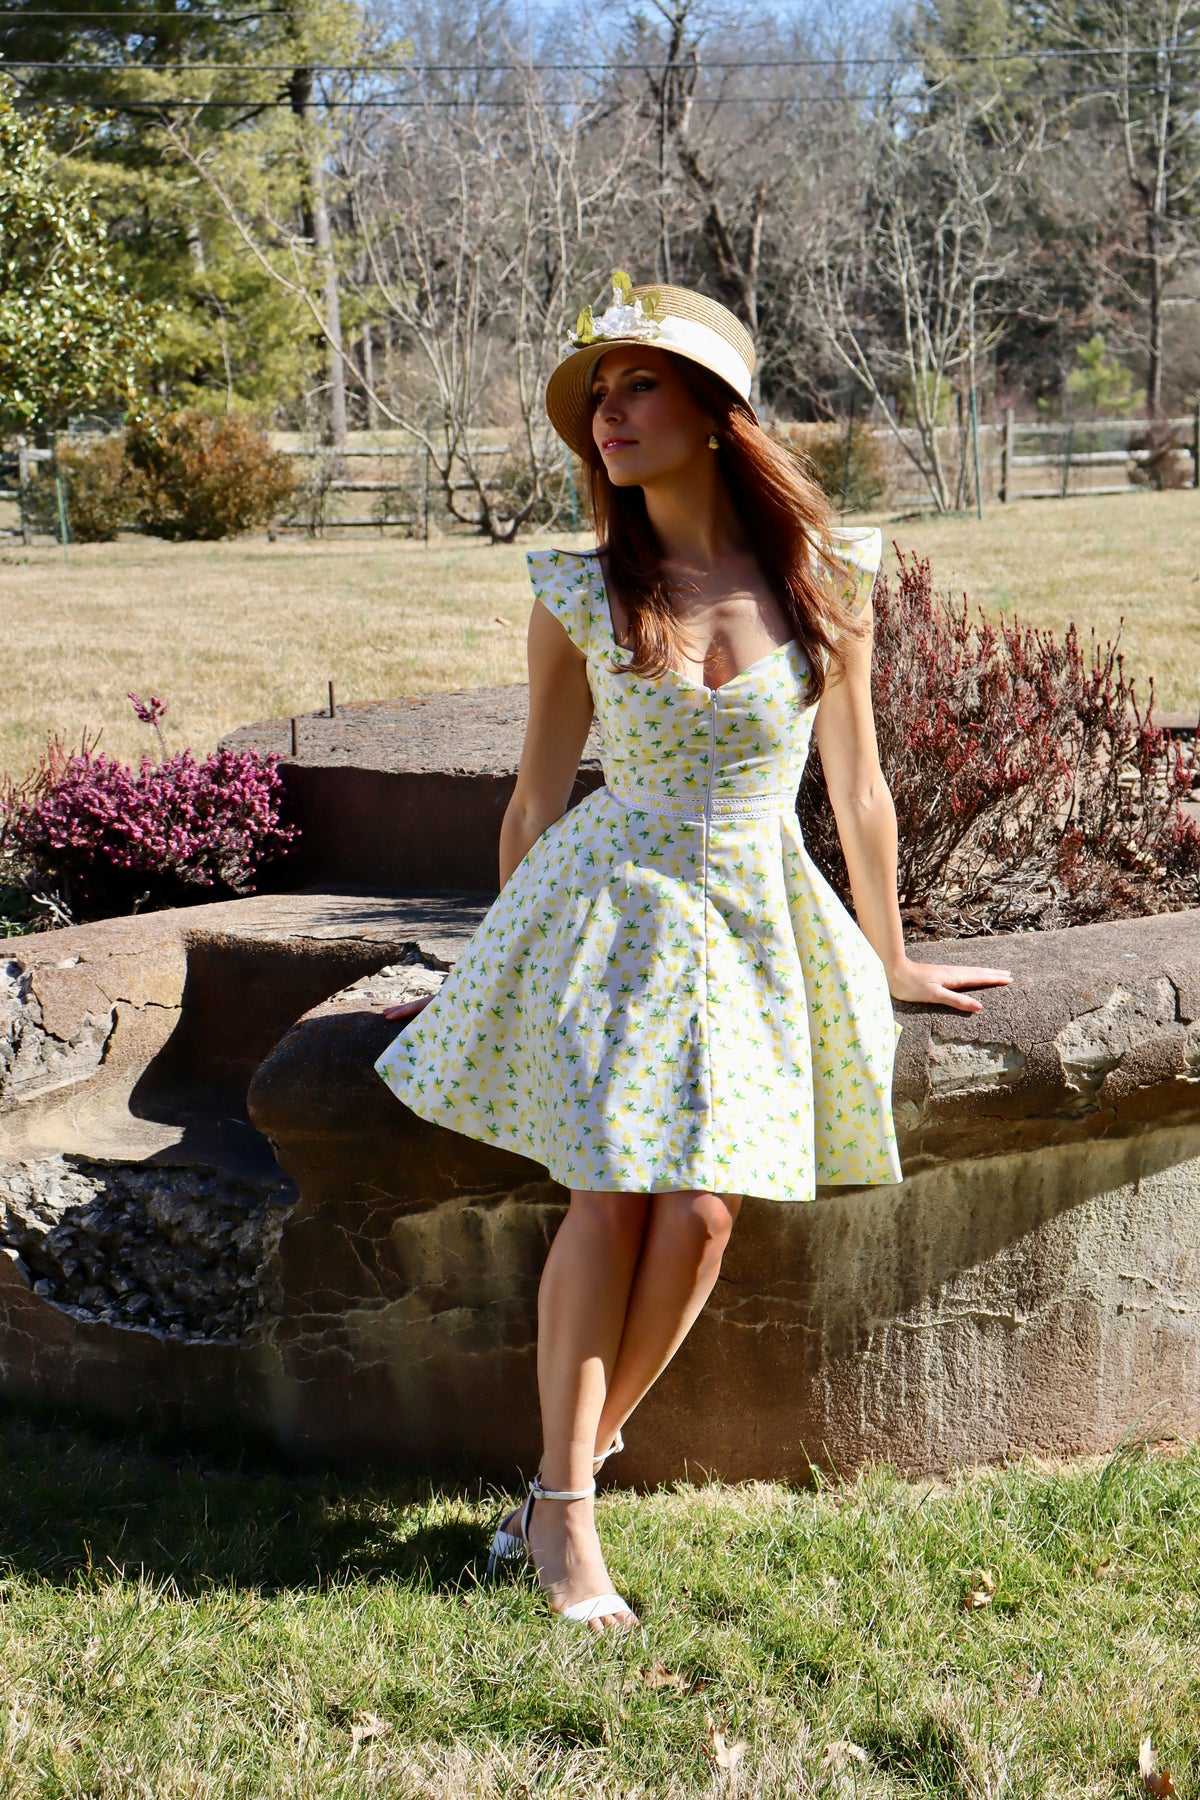 Model in lemon print dress wearing a straw hat sitting on a rock, looking into the distance.